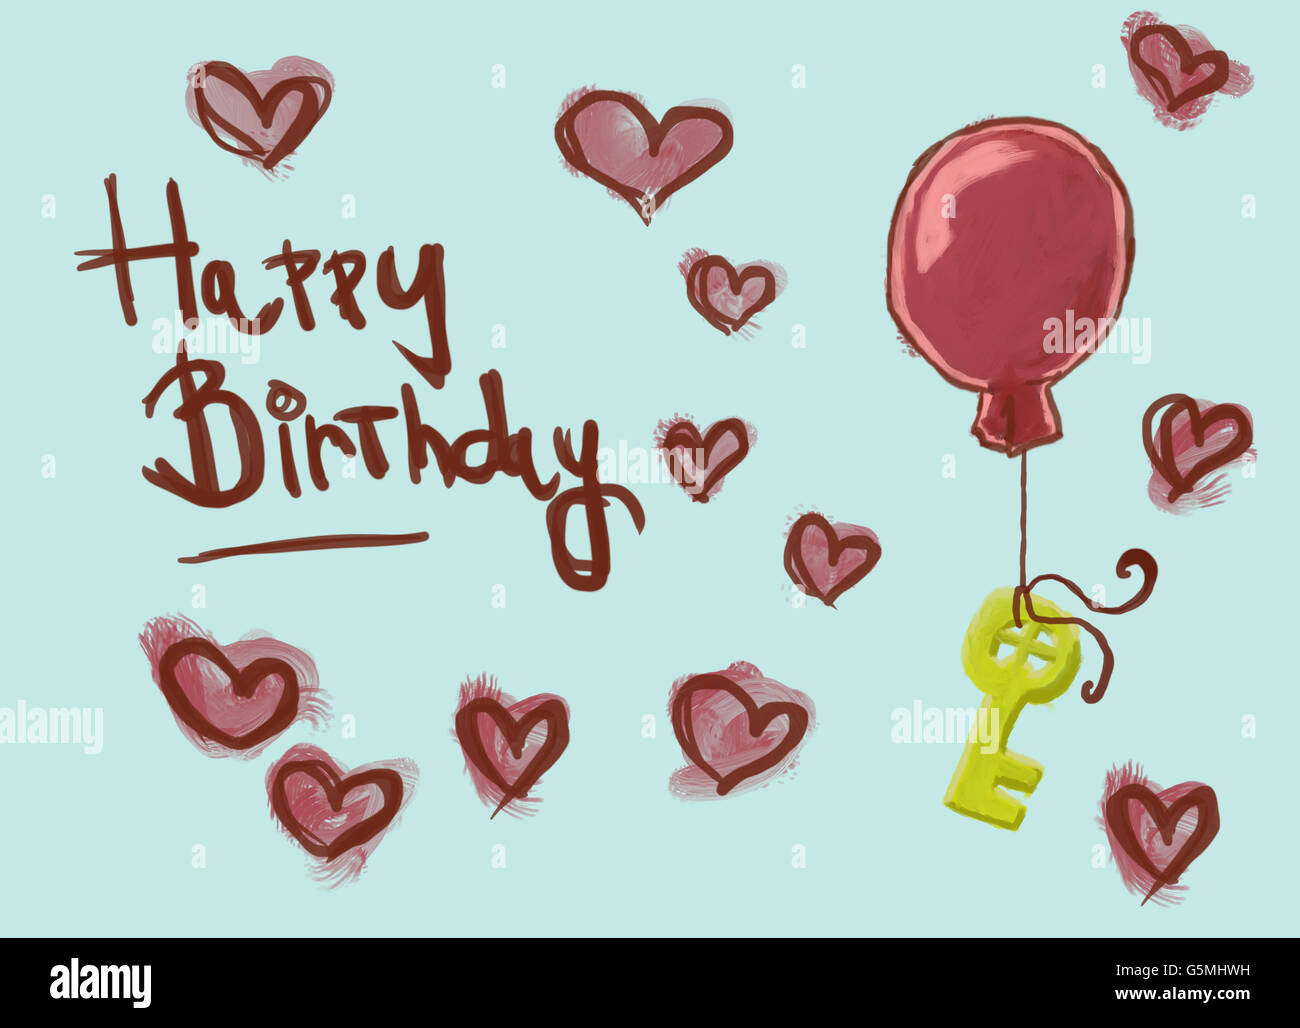 Happy birthday card with oil-like painted key hanging on a balloon Stock Photo